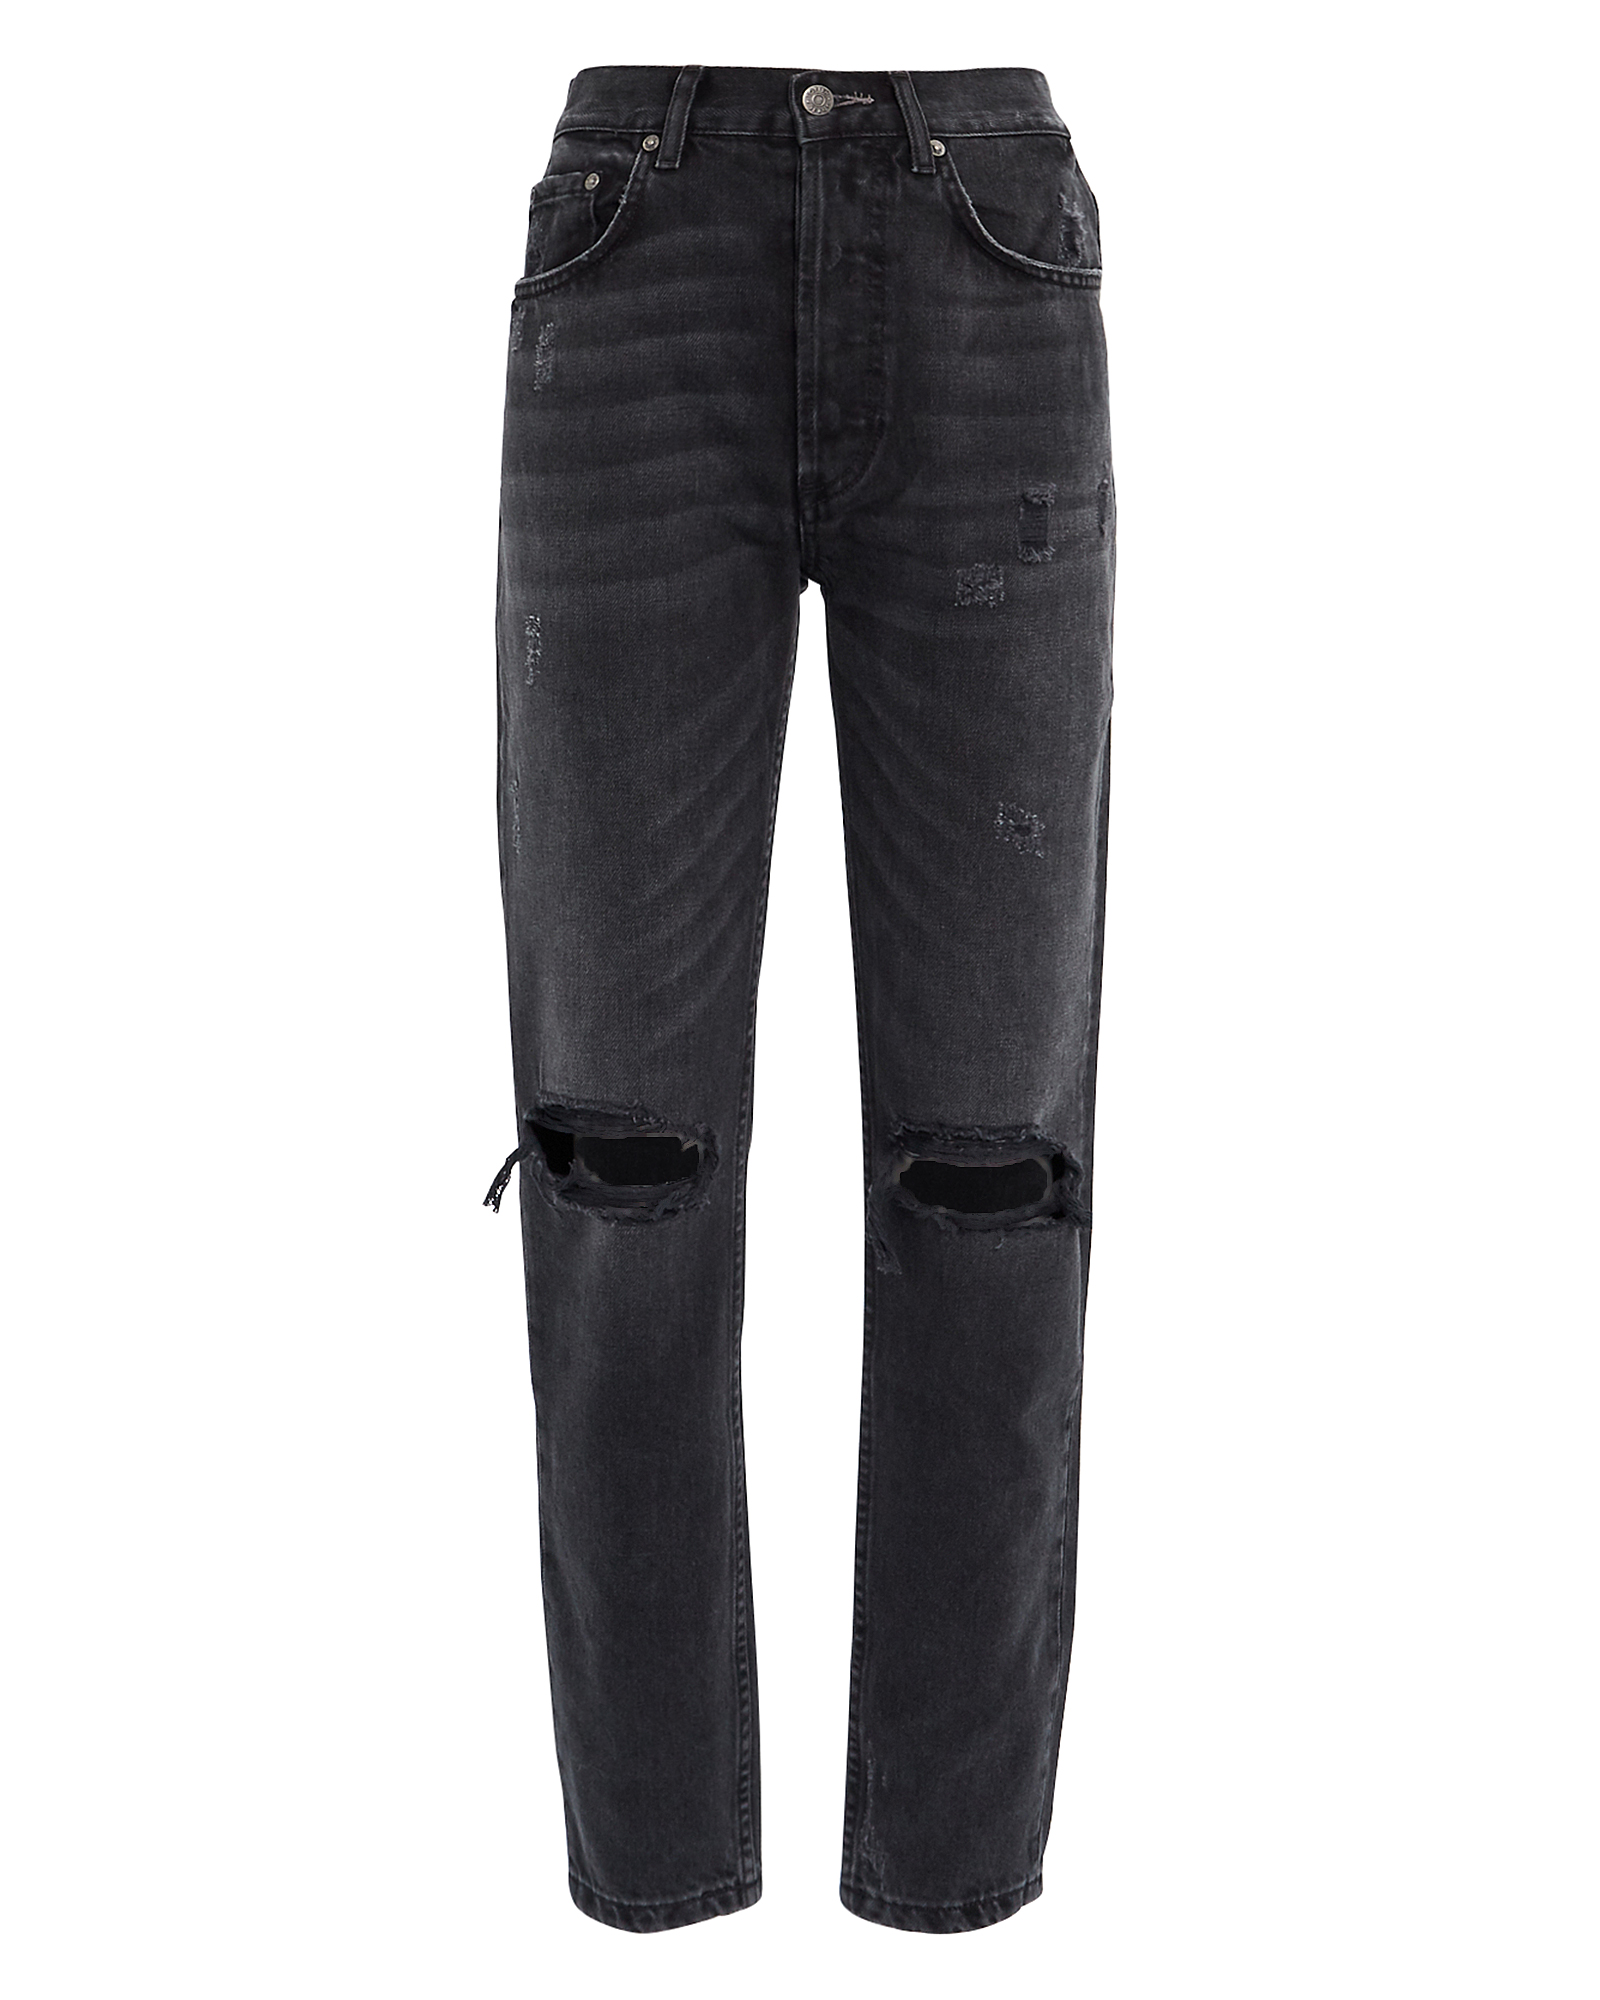 Boyish Jeans | The Billy High-Rise Skinny Jeans | INTERMIX®